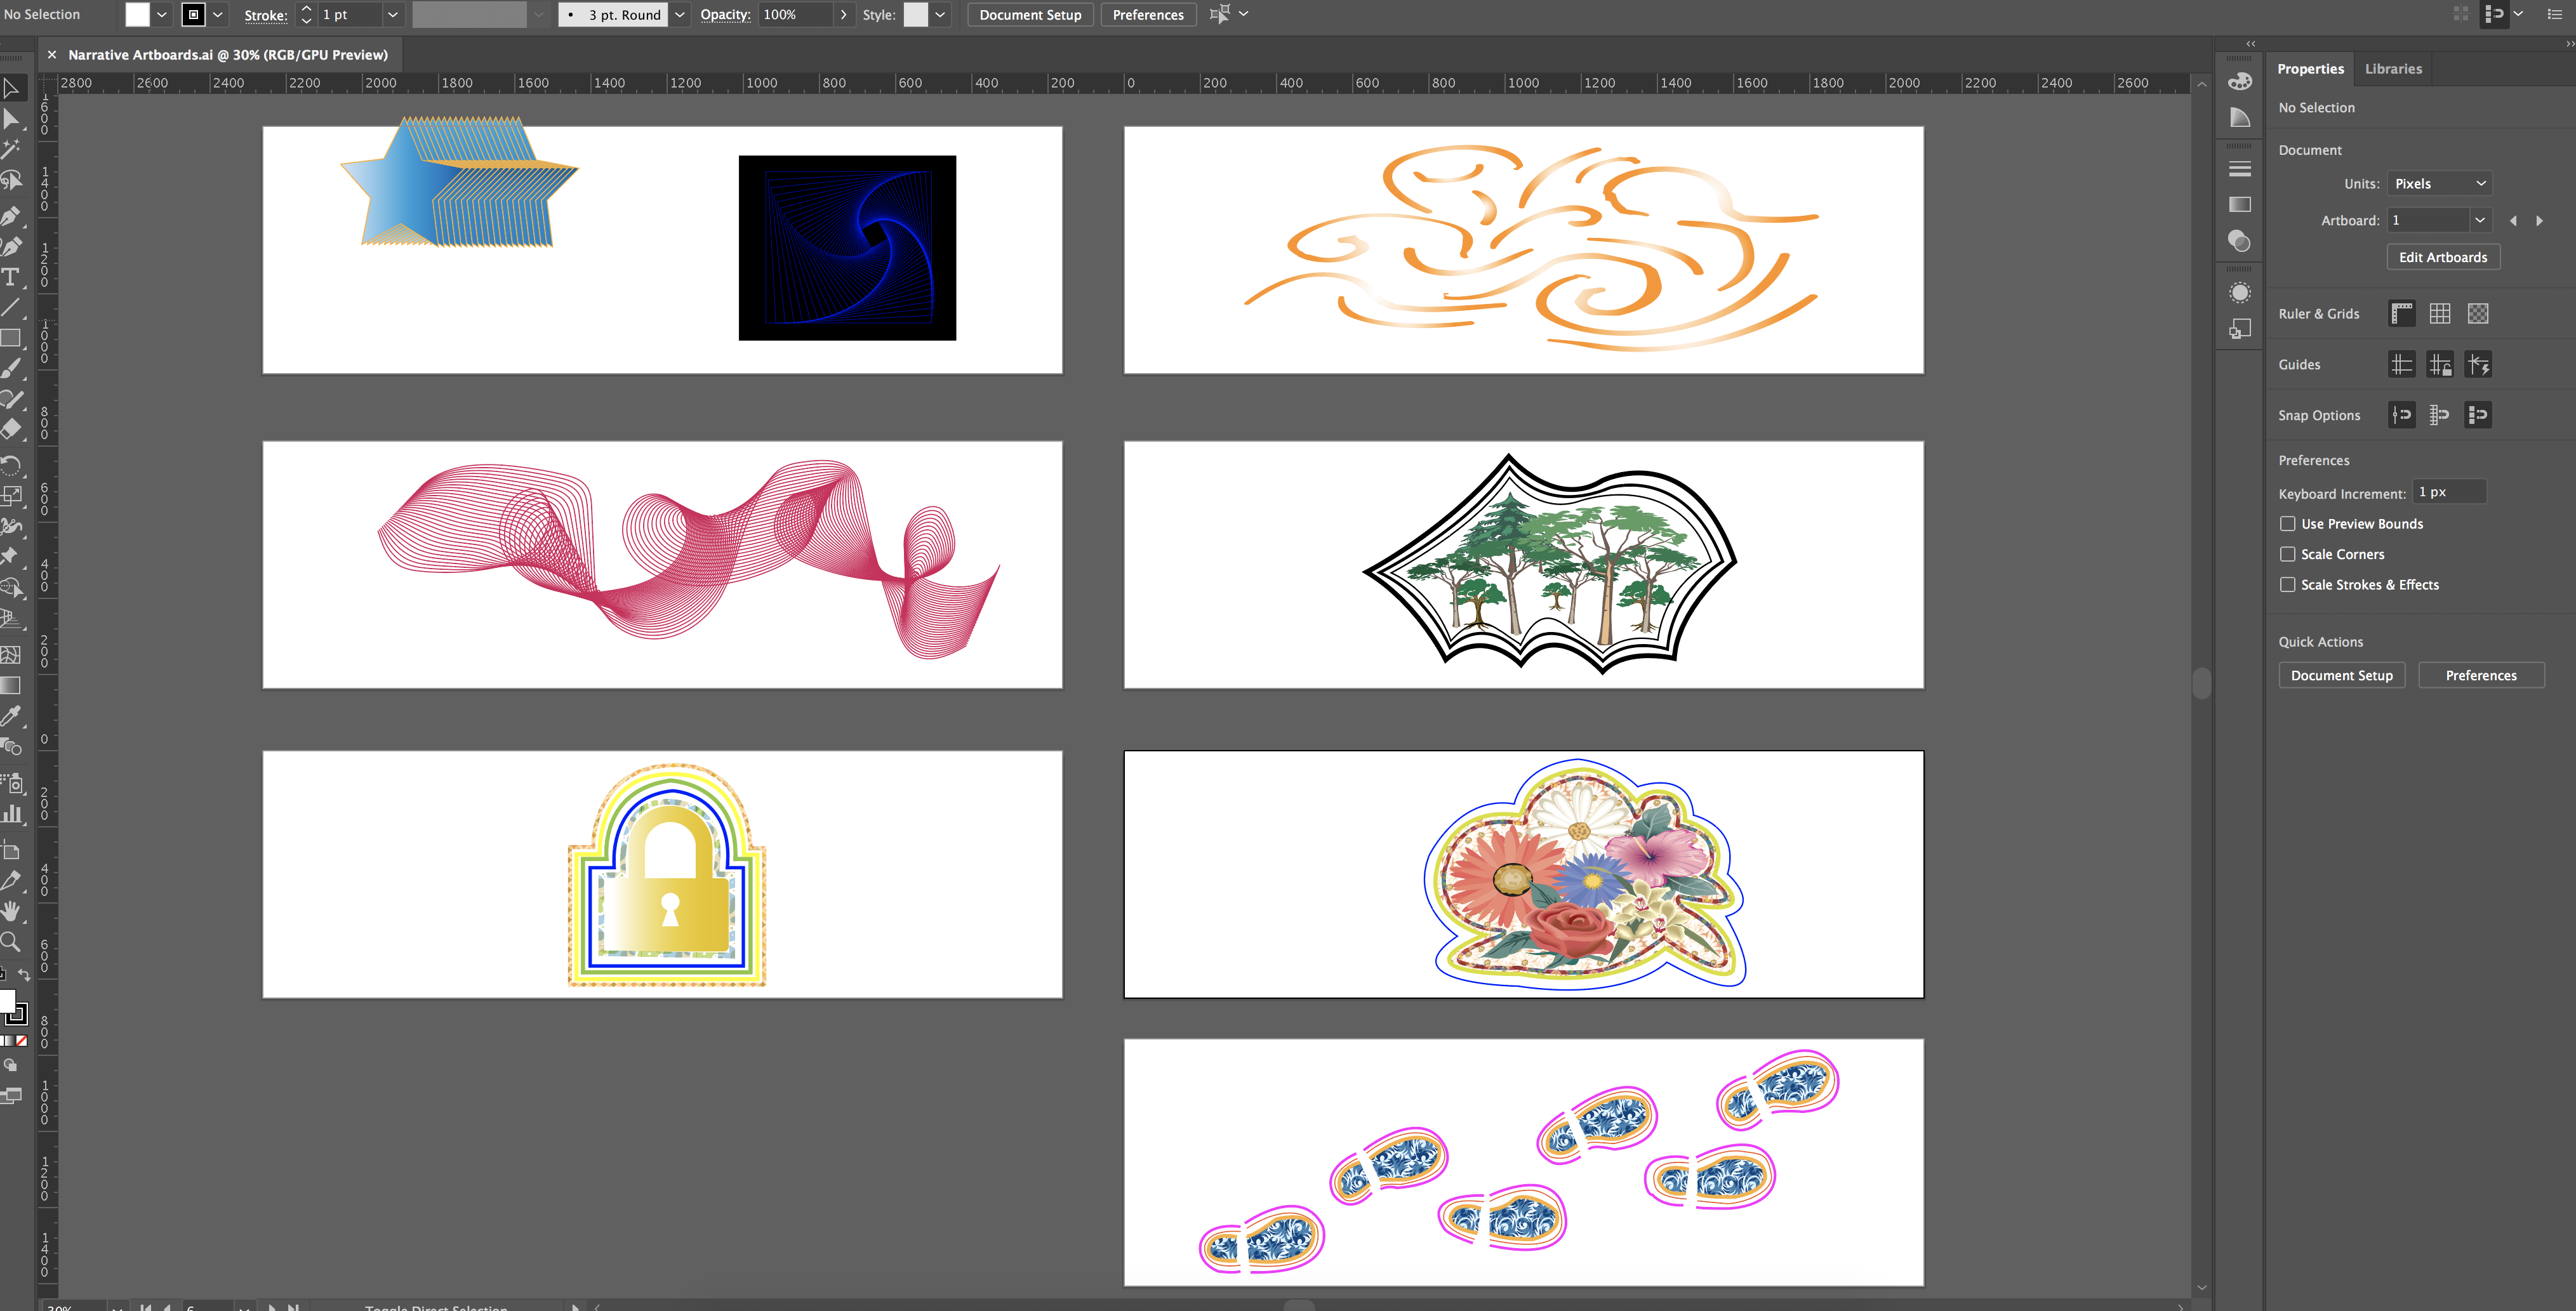 This is a screenshot of my illustrations in production in Adobe Illustrator.